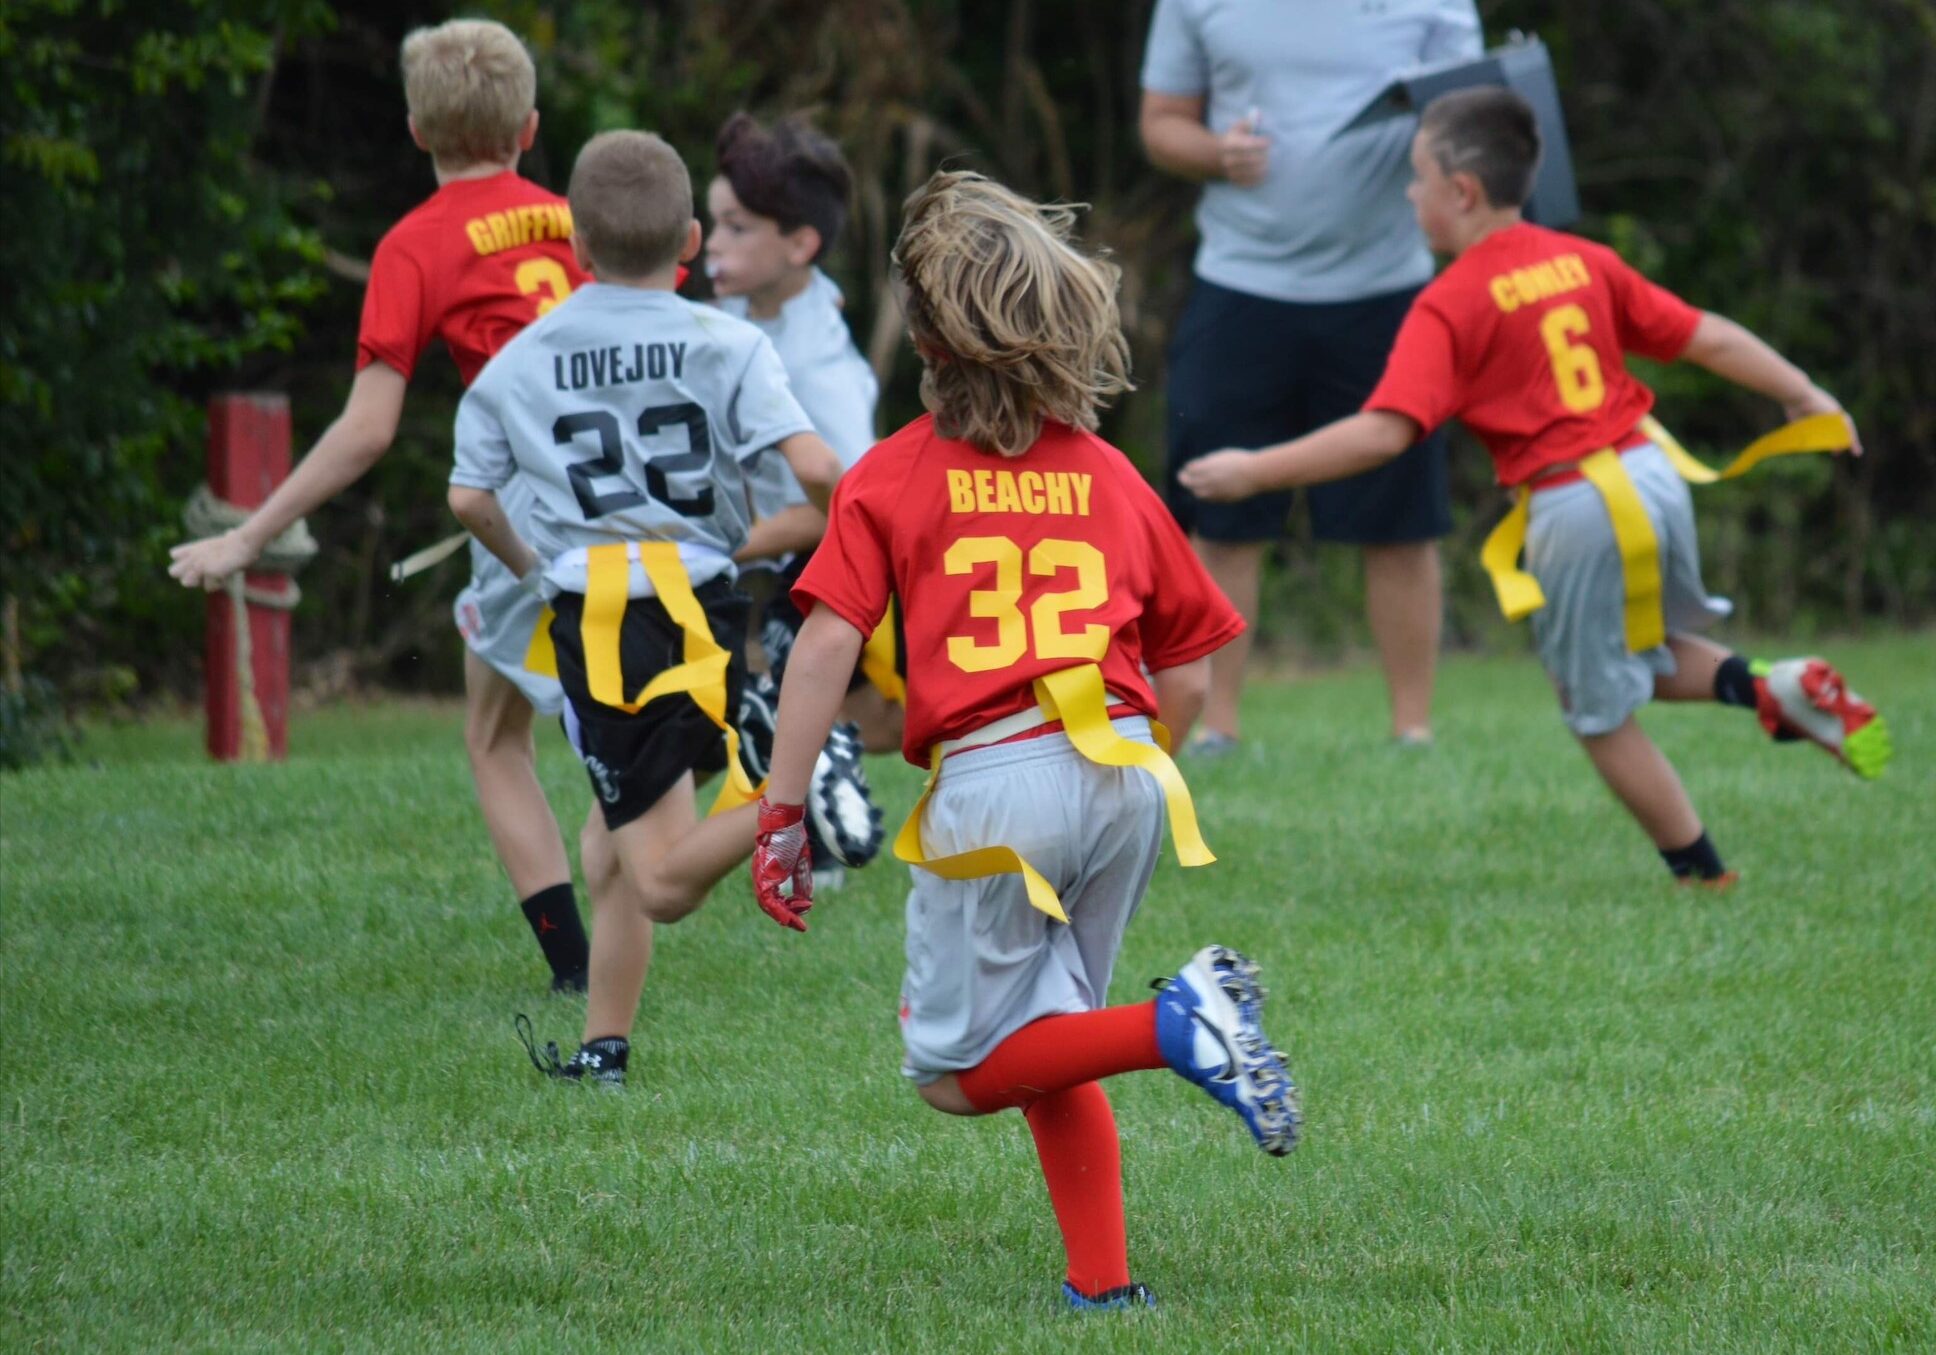 FlagFootball Cropped